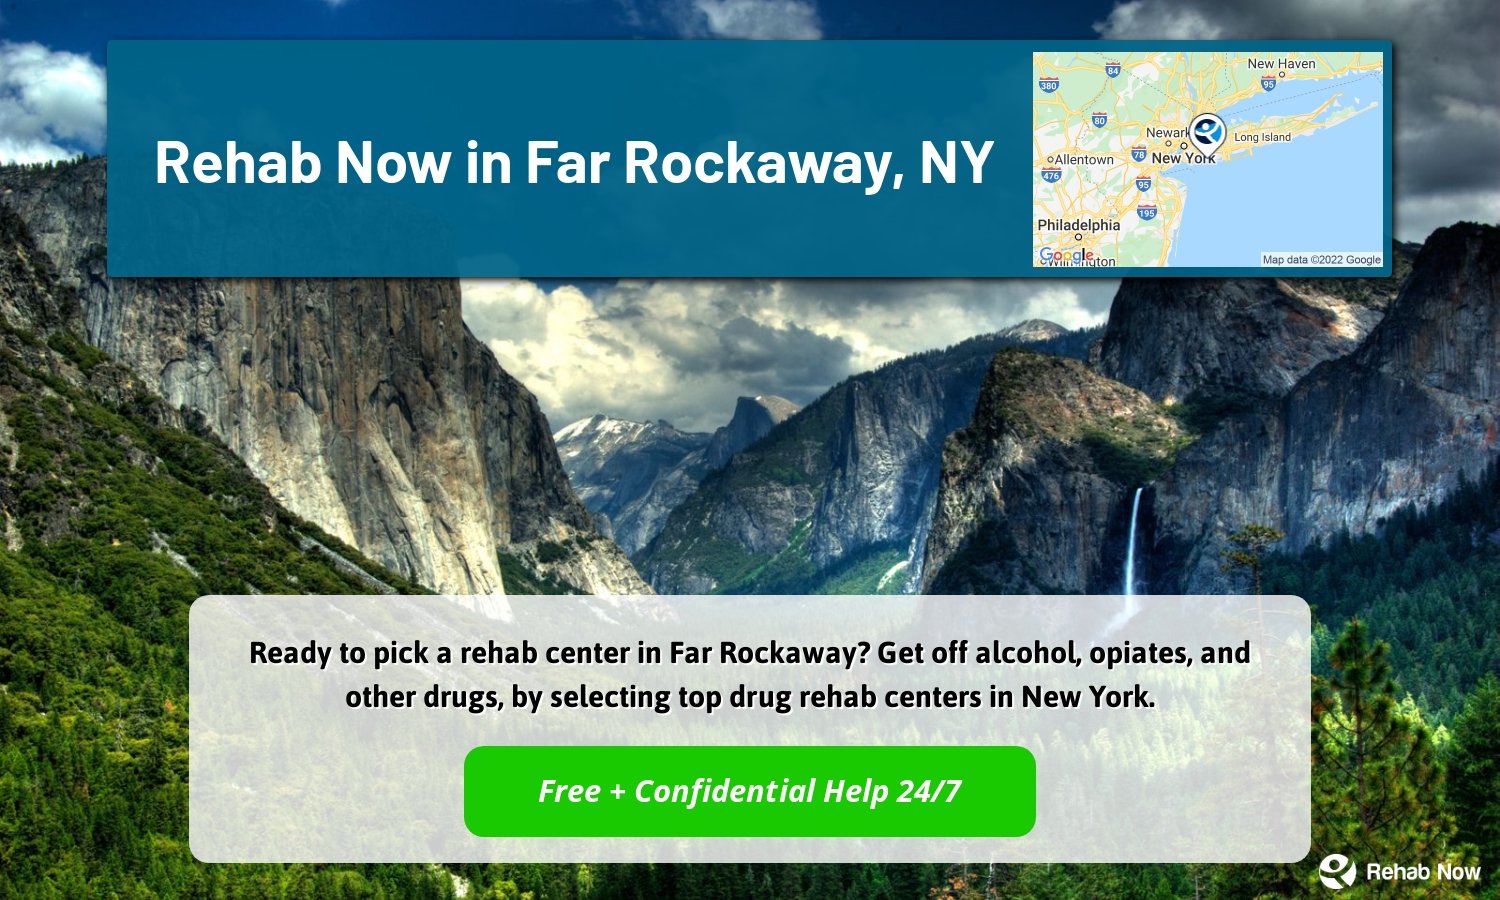 Ready to pick a rehab center in Far Rockaway? Get off alcohol, opiates, and other drugs, by selecting top drug rehab centers in New York.